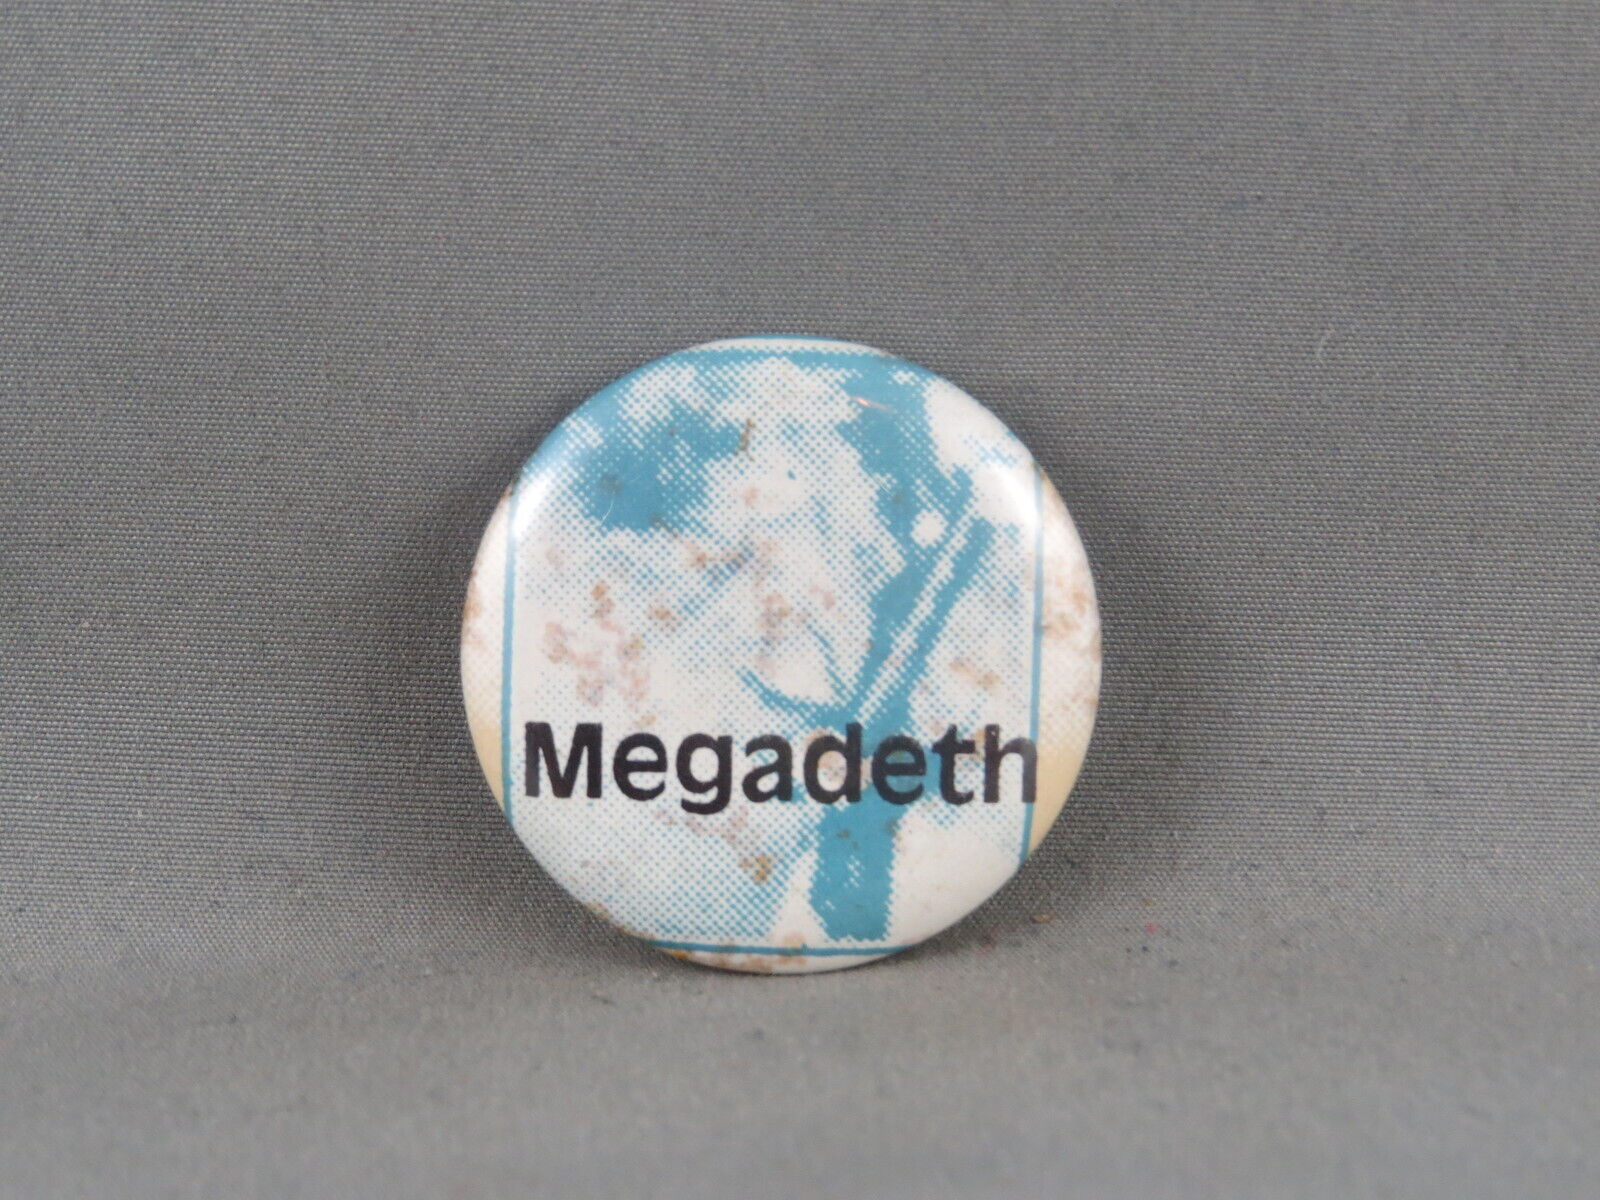 Vintage Band Pin - Megadeath Blur Graphic - Celluloid Pin 